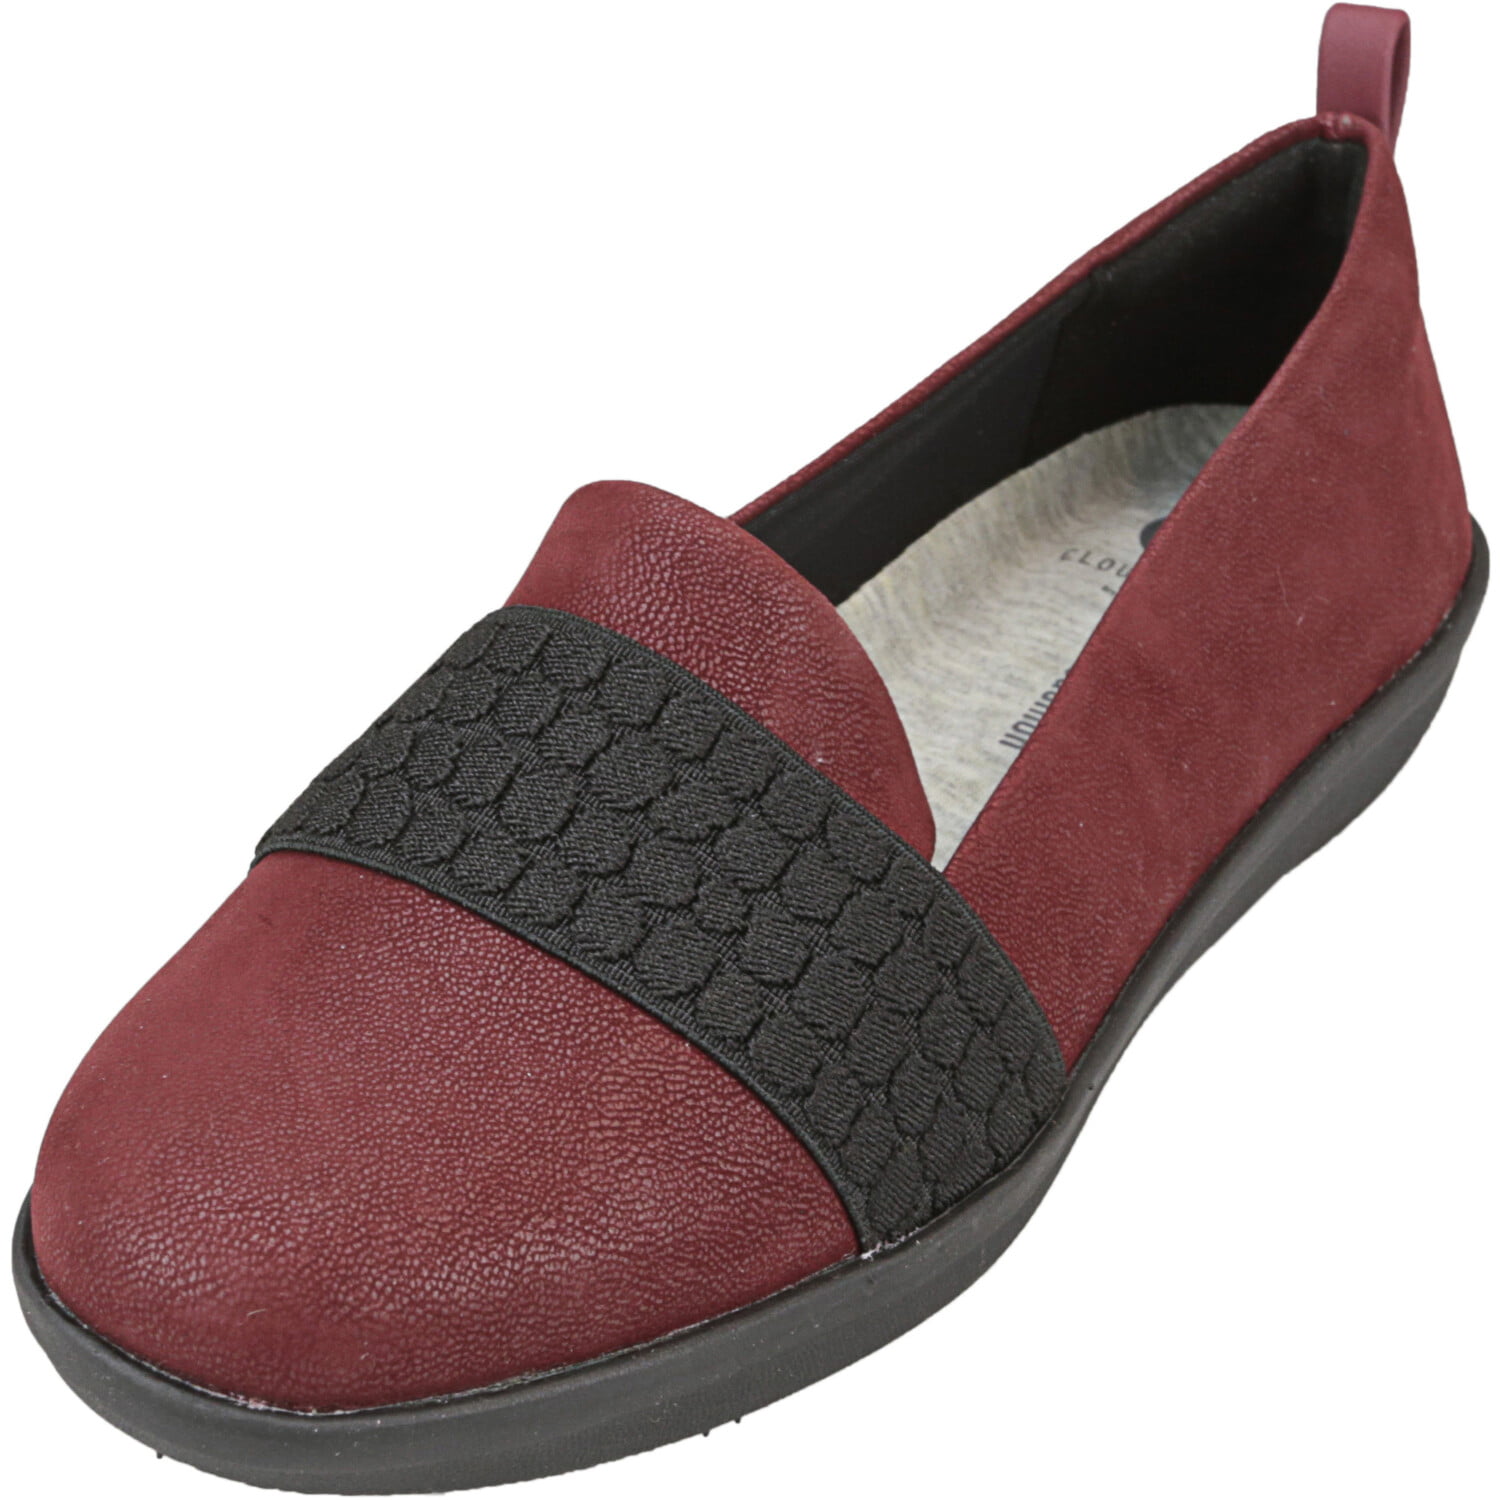 clarks maroon shoes